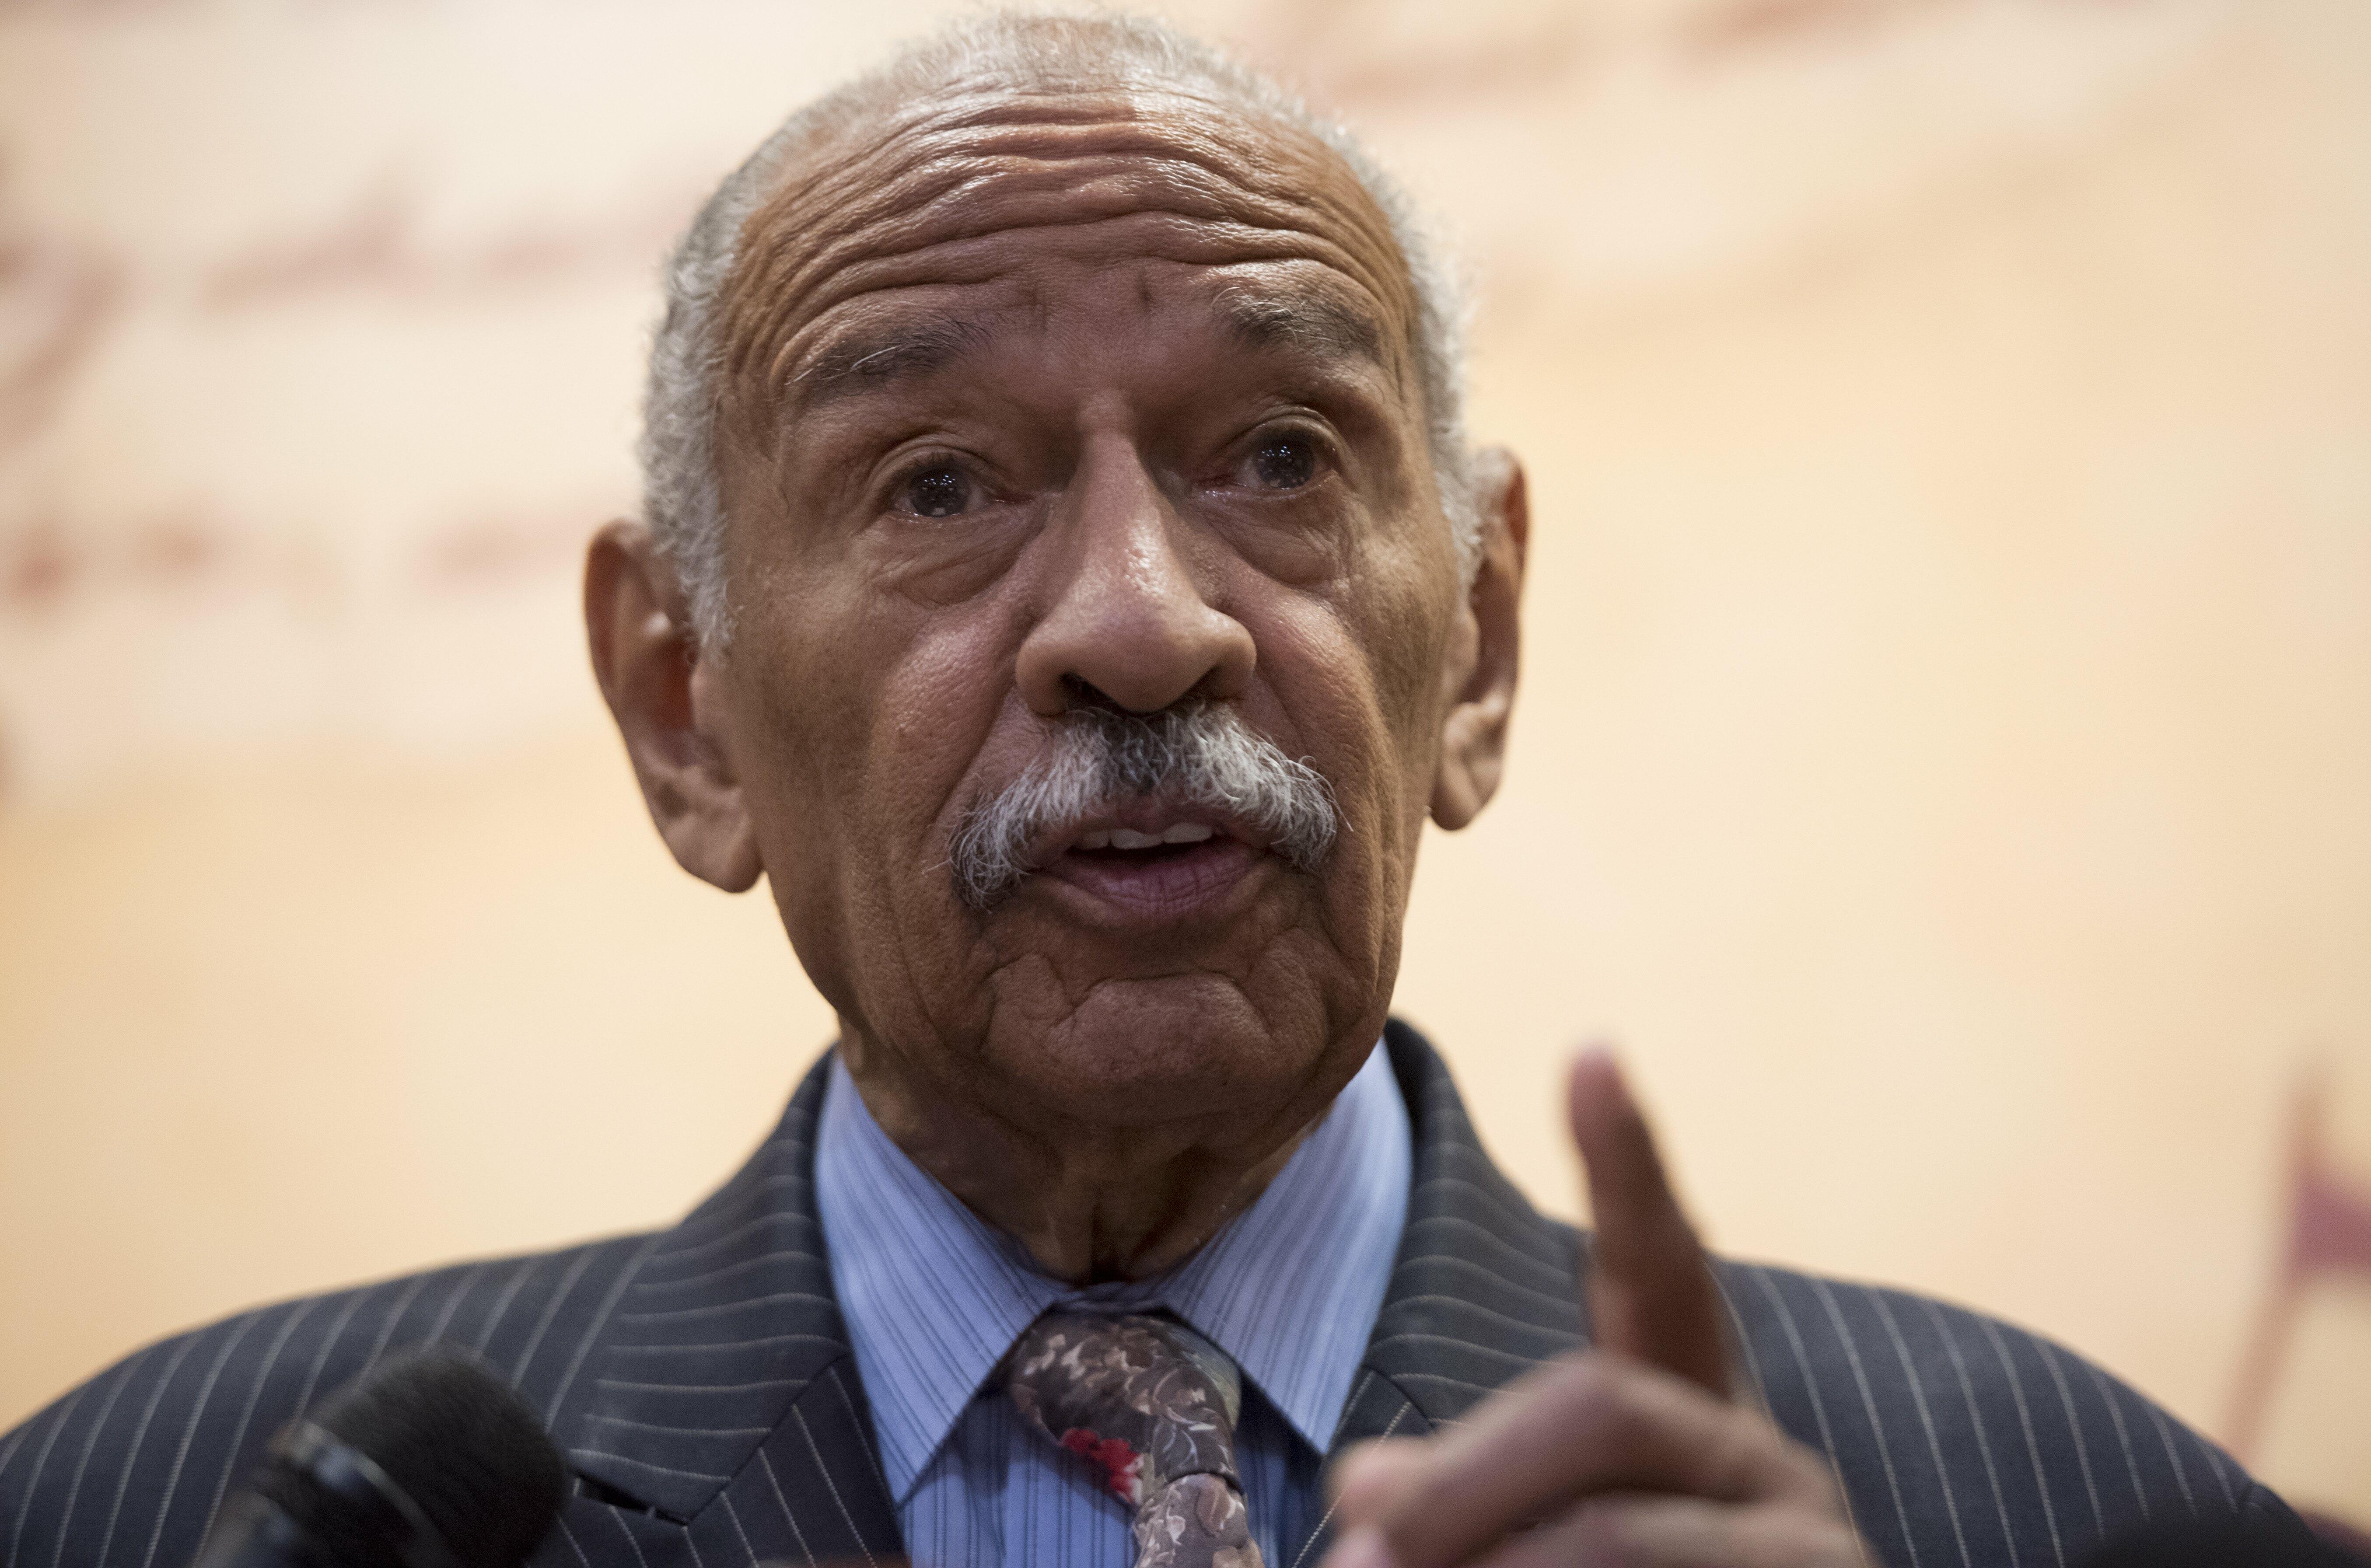 US Representative John Conyers, Democrat of Michigan, speaks regarding a lawsuit members of Congress have filed against US President Donald Trump for violating the emoluments clause of the US Constitution which bans Presidents from accepting payments, benefits or gifts from foreign states without the consent of Congress, during a press conference on Capitol Hill in Washington, DC, June 20, 2017. / AFP PHOTO / SAUL LOEB (Photo credit should read SAUL LOEB/AFP/Getty Images)